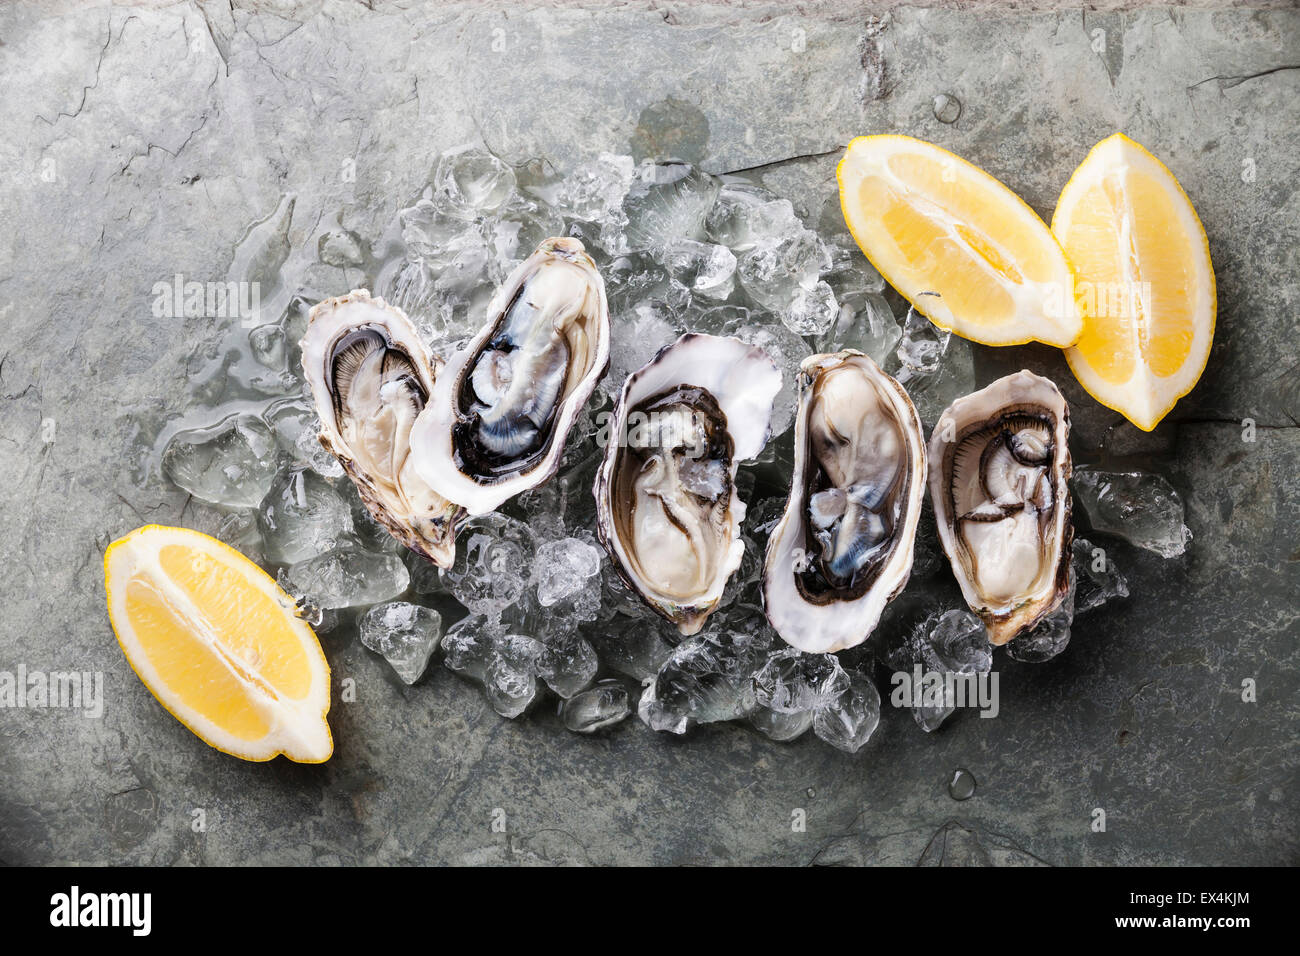 Opened Oysters on stone plate with ice and lemon Stock Photo